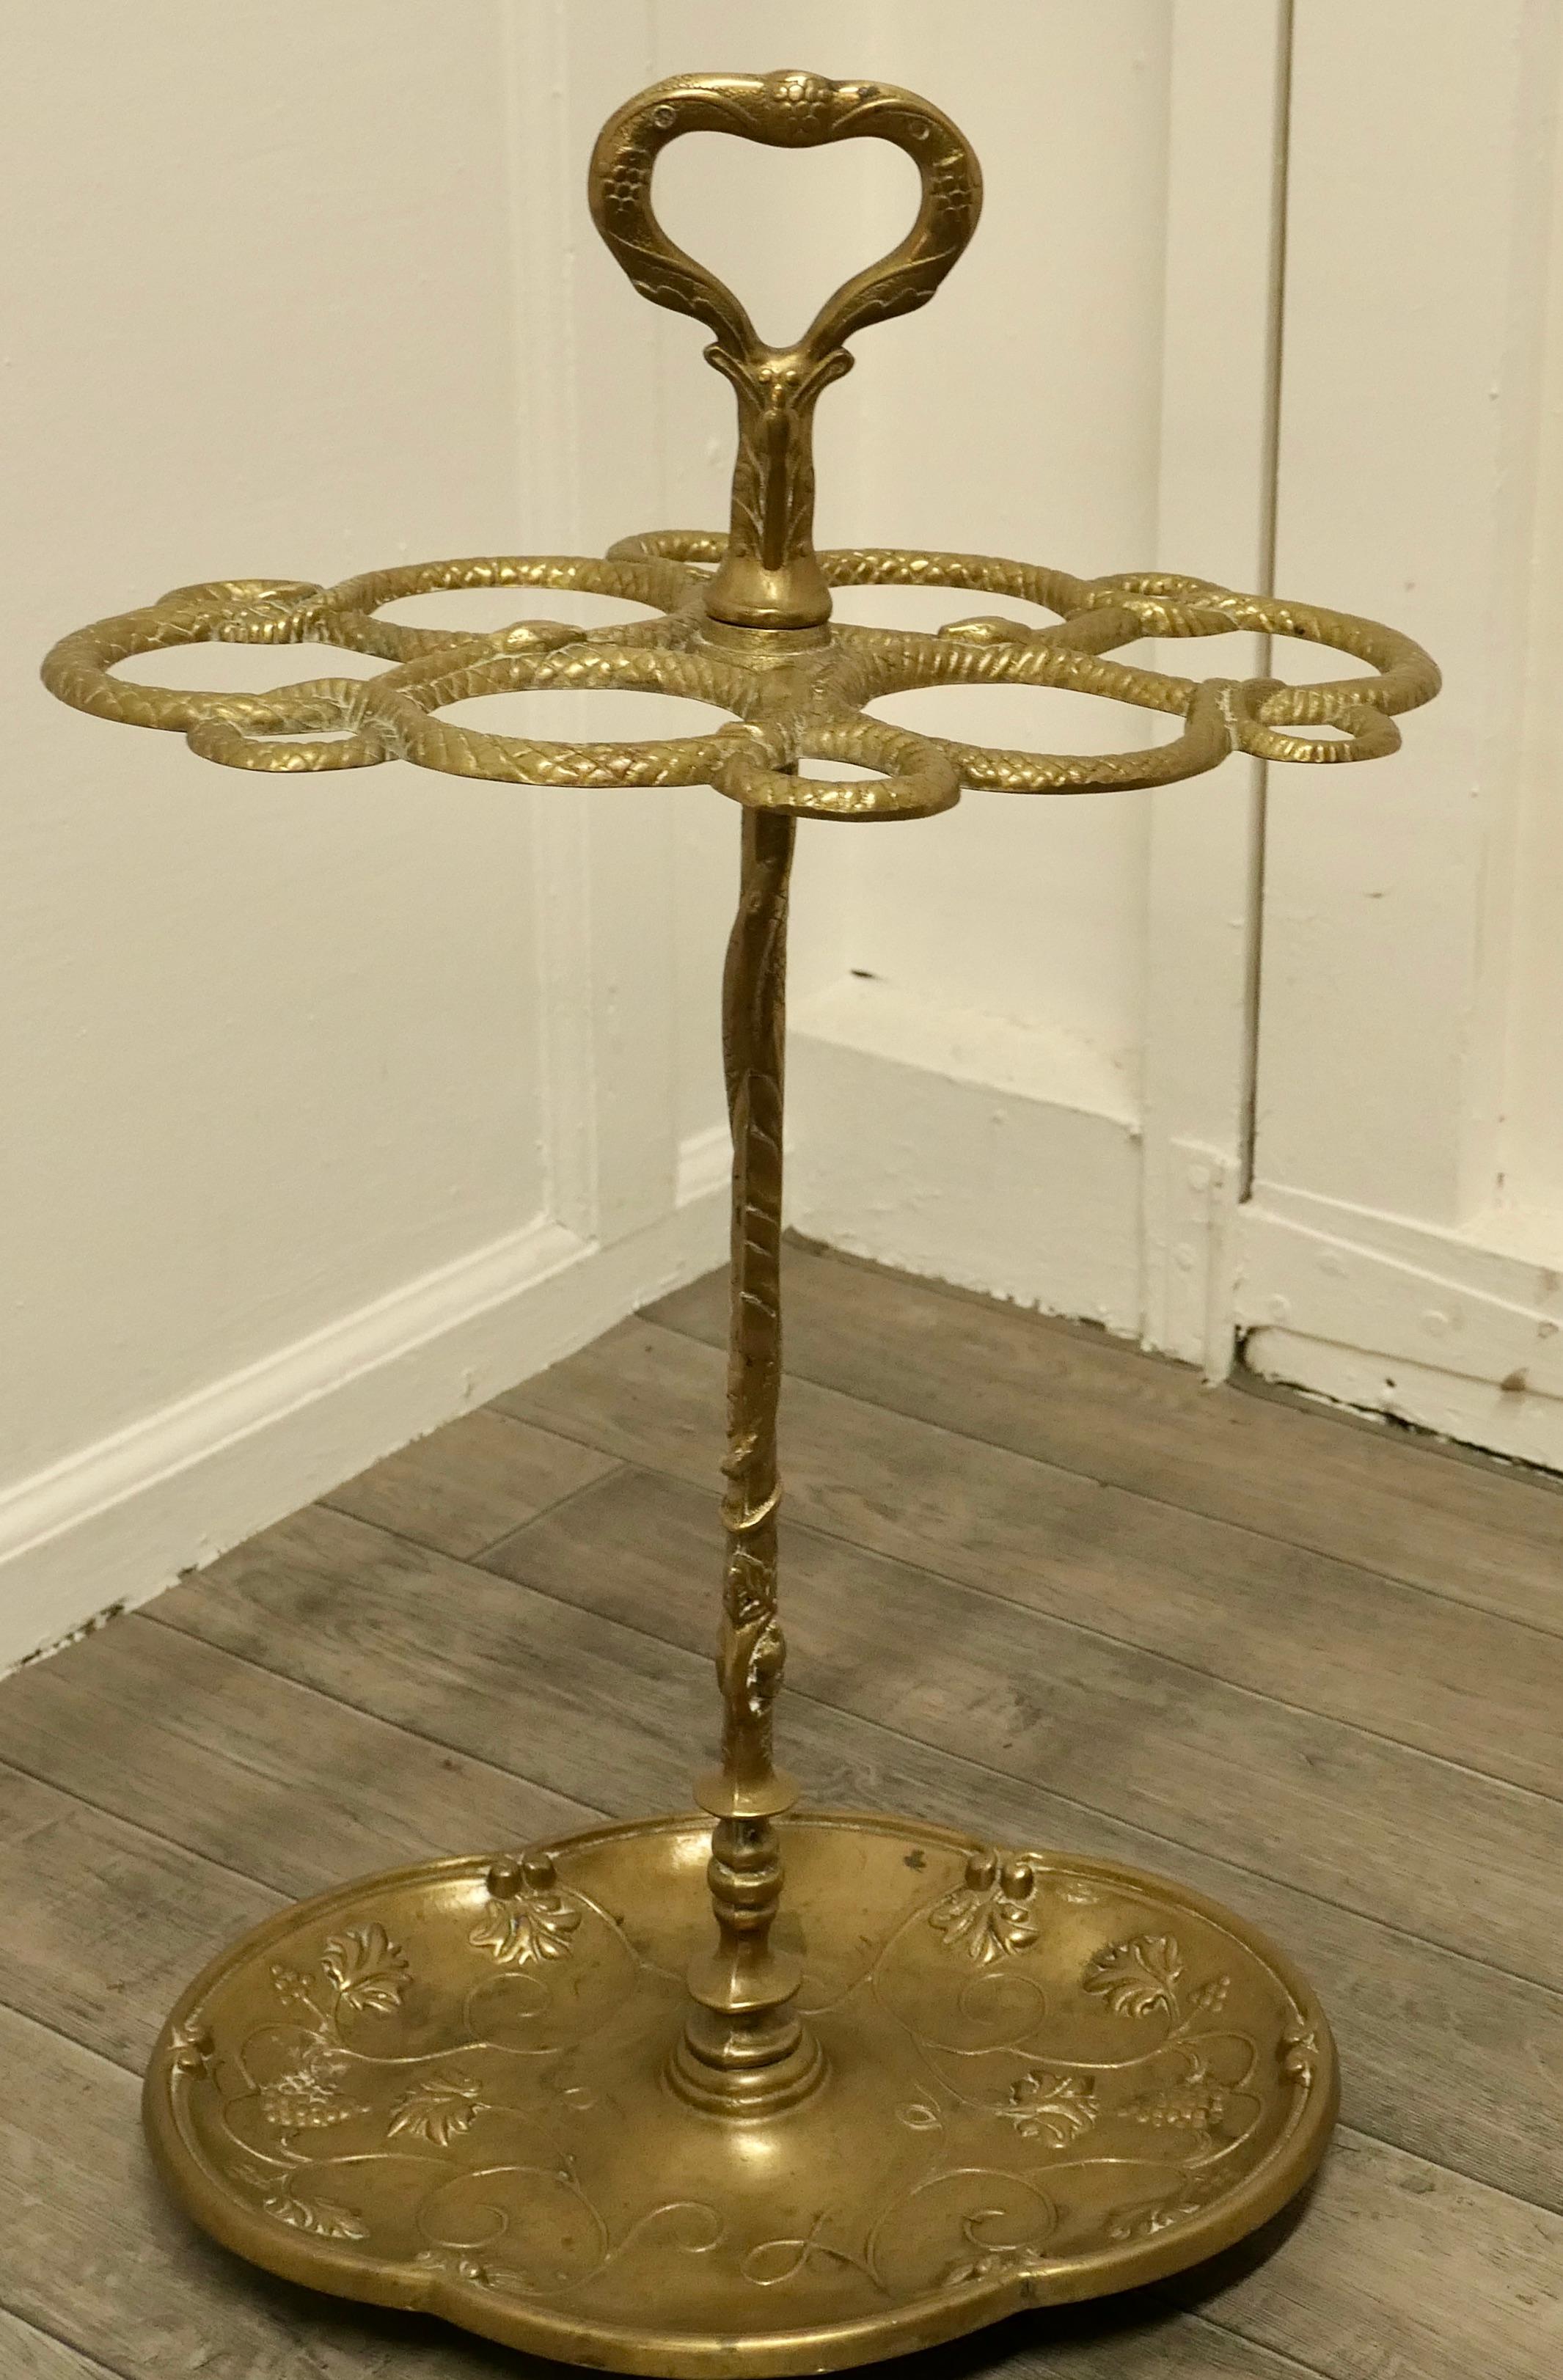 Entwined Snake cast iron brass walking stick stand 

A charming piece with a very unusual shape formed by several snakes winding up from the bottom and then twisting to make the holders for the sticks and umbrellas
The heavy brass base is a drip